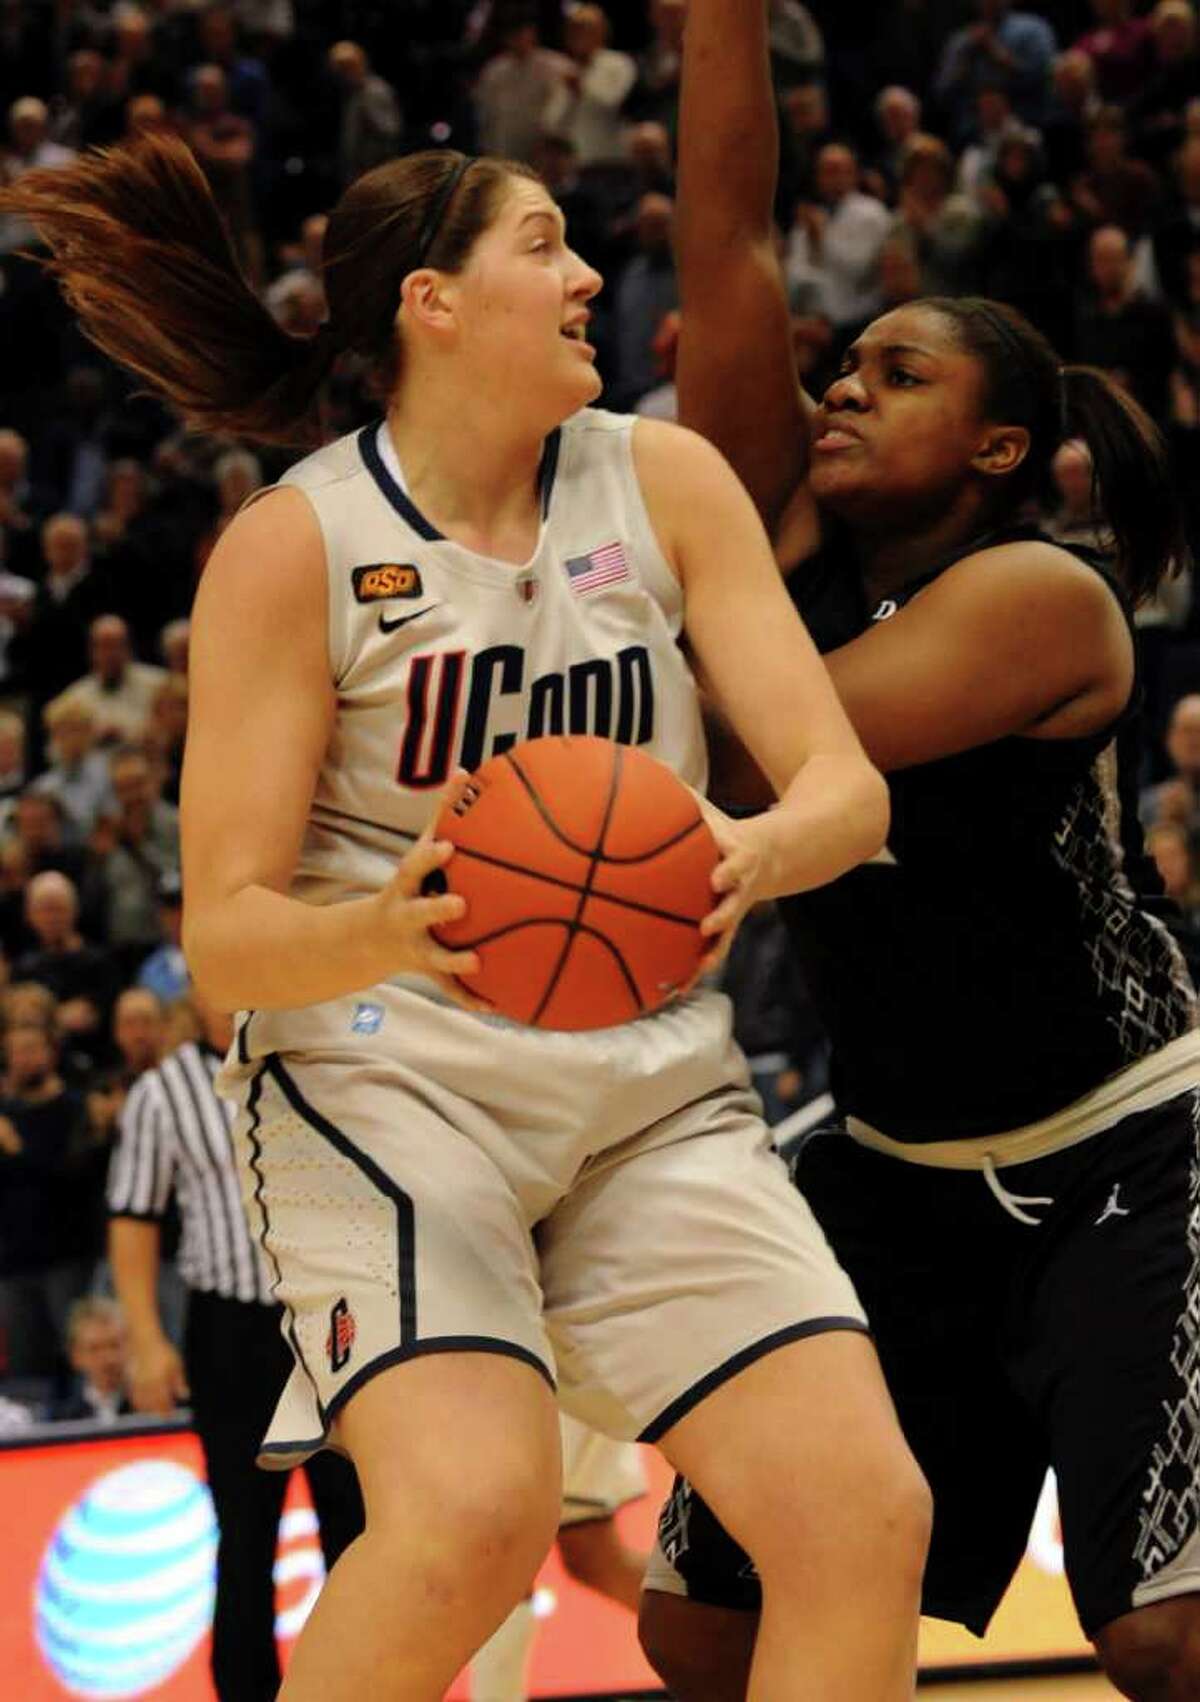 Connecticut's Stefanie Dolson comes in for a sho as Providence's Lauren Okafoir defends during the first half of an NCAA college basketball game in Hartford, Conn., Tuesday, Jan. 10, 2012, in Hartford, Conn. (AP Photo/Bob Child)